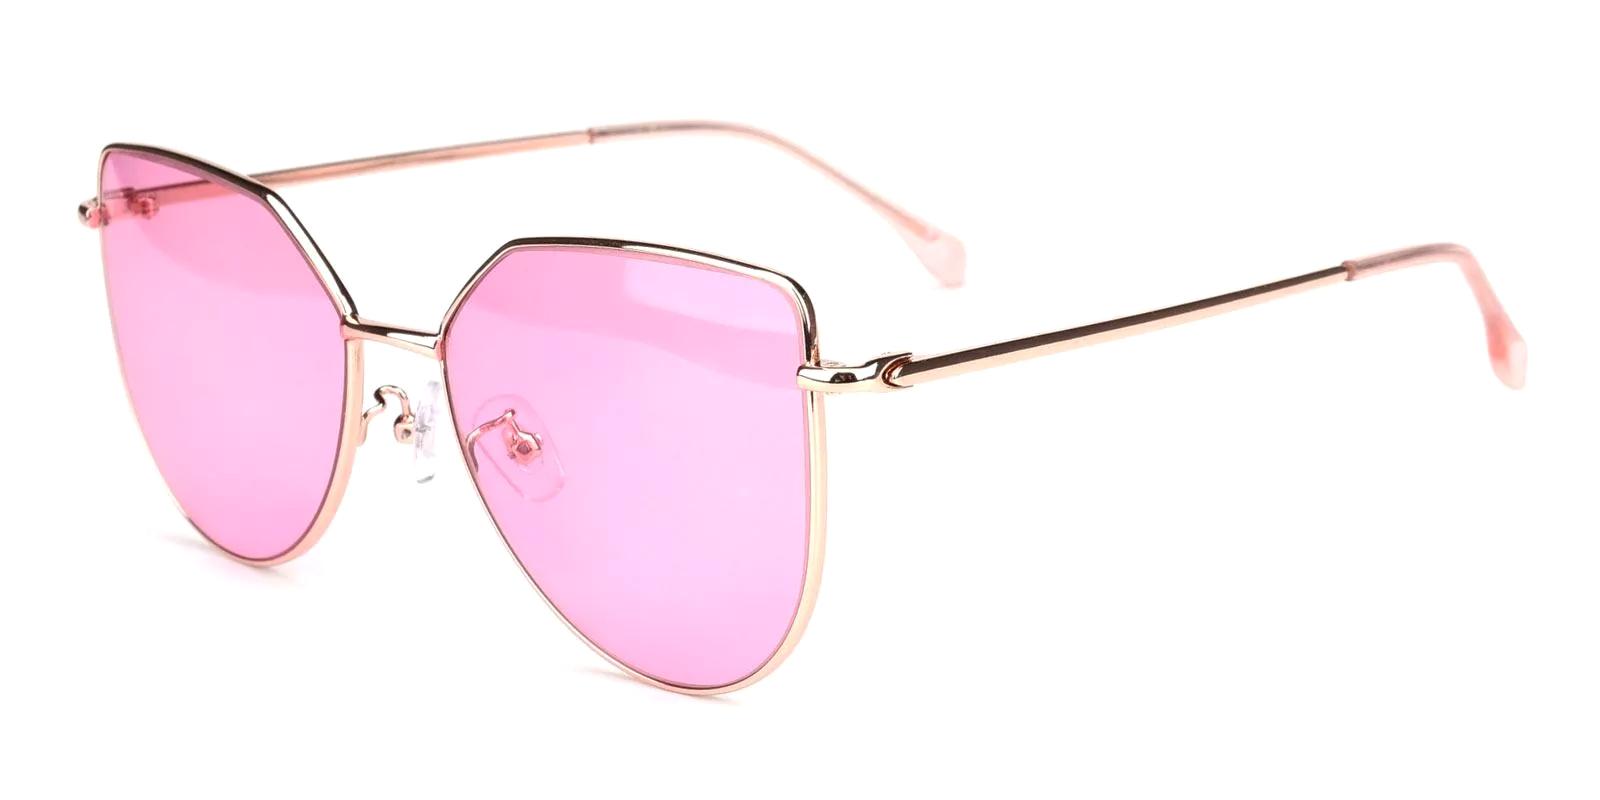 Unciacy Rosegold Metal NosePads , Sunglasses Frames from ABBE Glasses